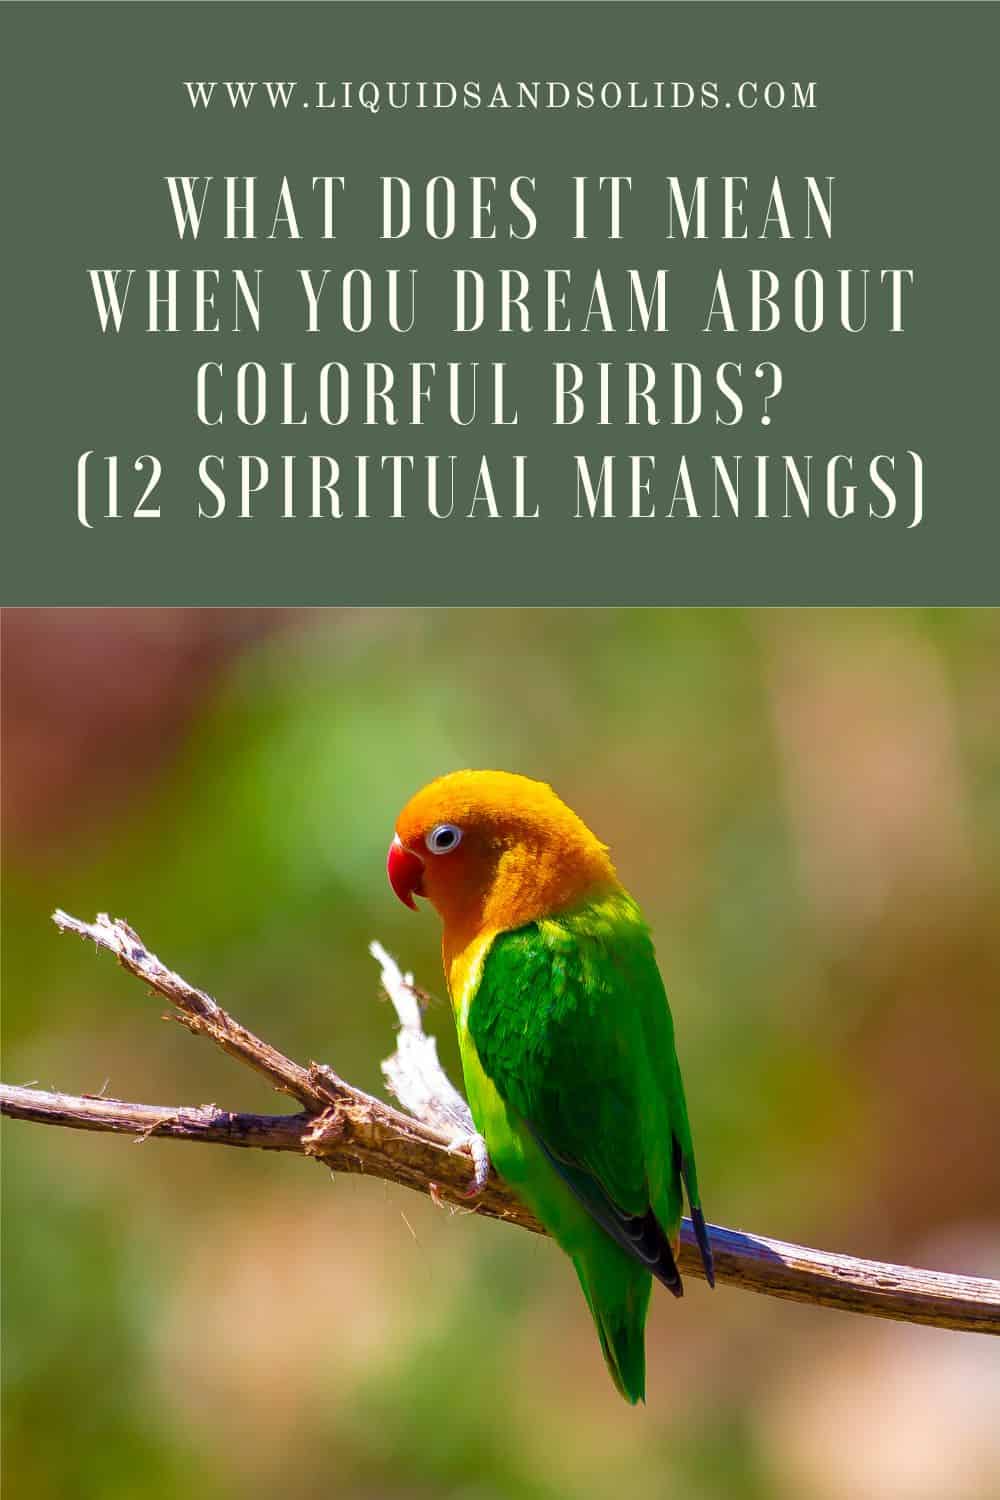 What Does It Mean When You Dream About Colorful Birds? (12 Spiritual Meanings)